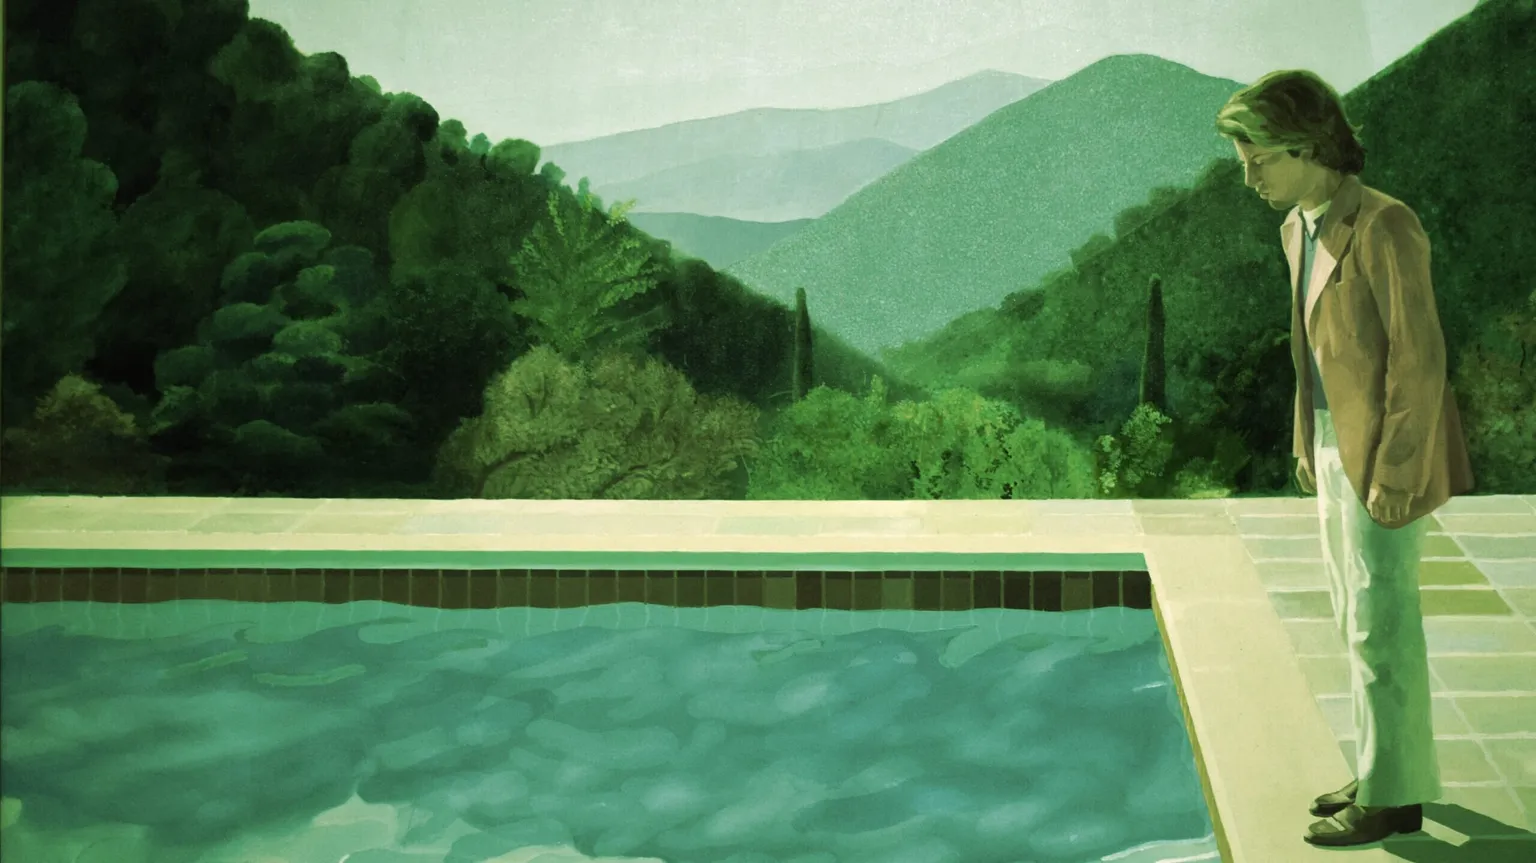 Image: David Hockney painting 'Portrait of an Artist (Pool with Two Figures)' via Flickr user Daniel Hartwig (CC BY 2.0)